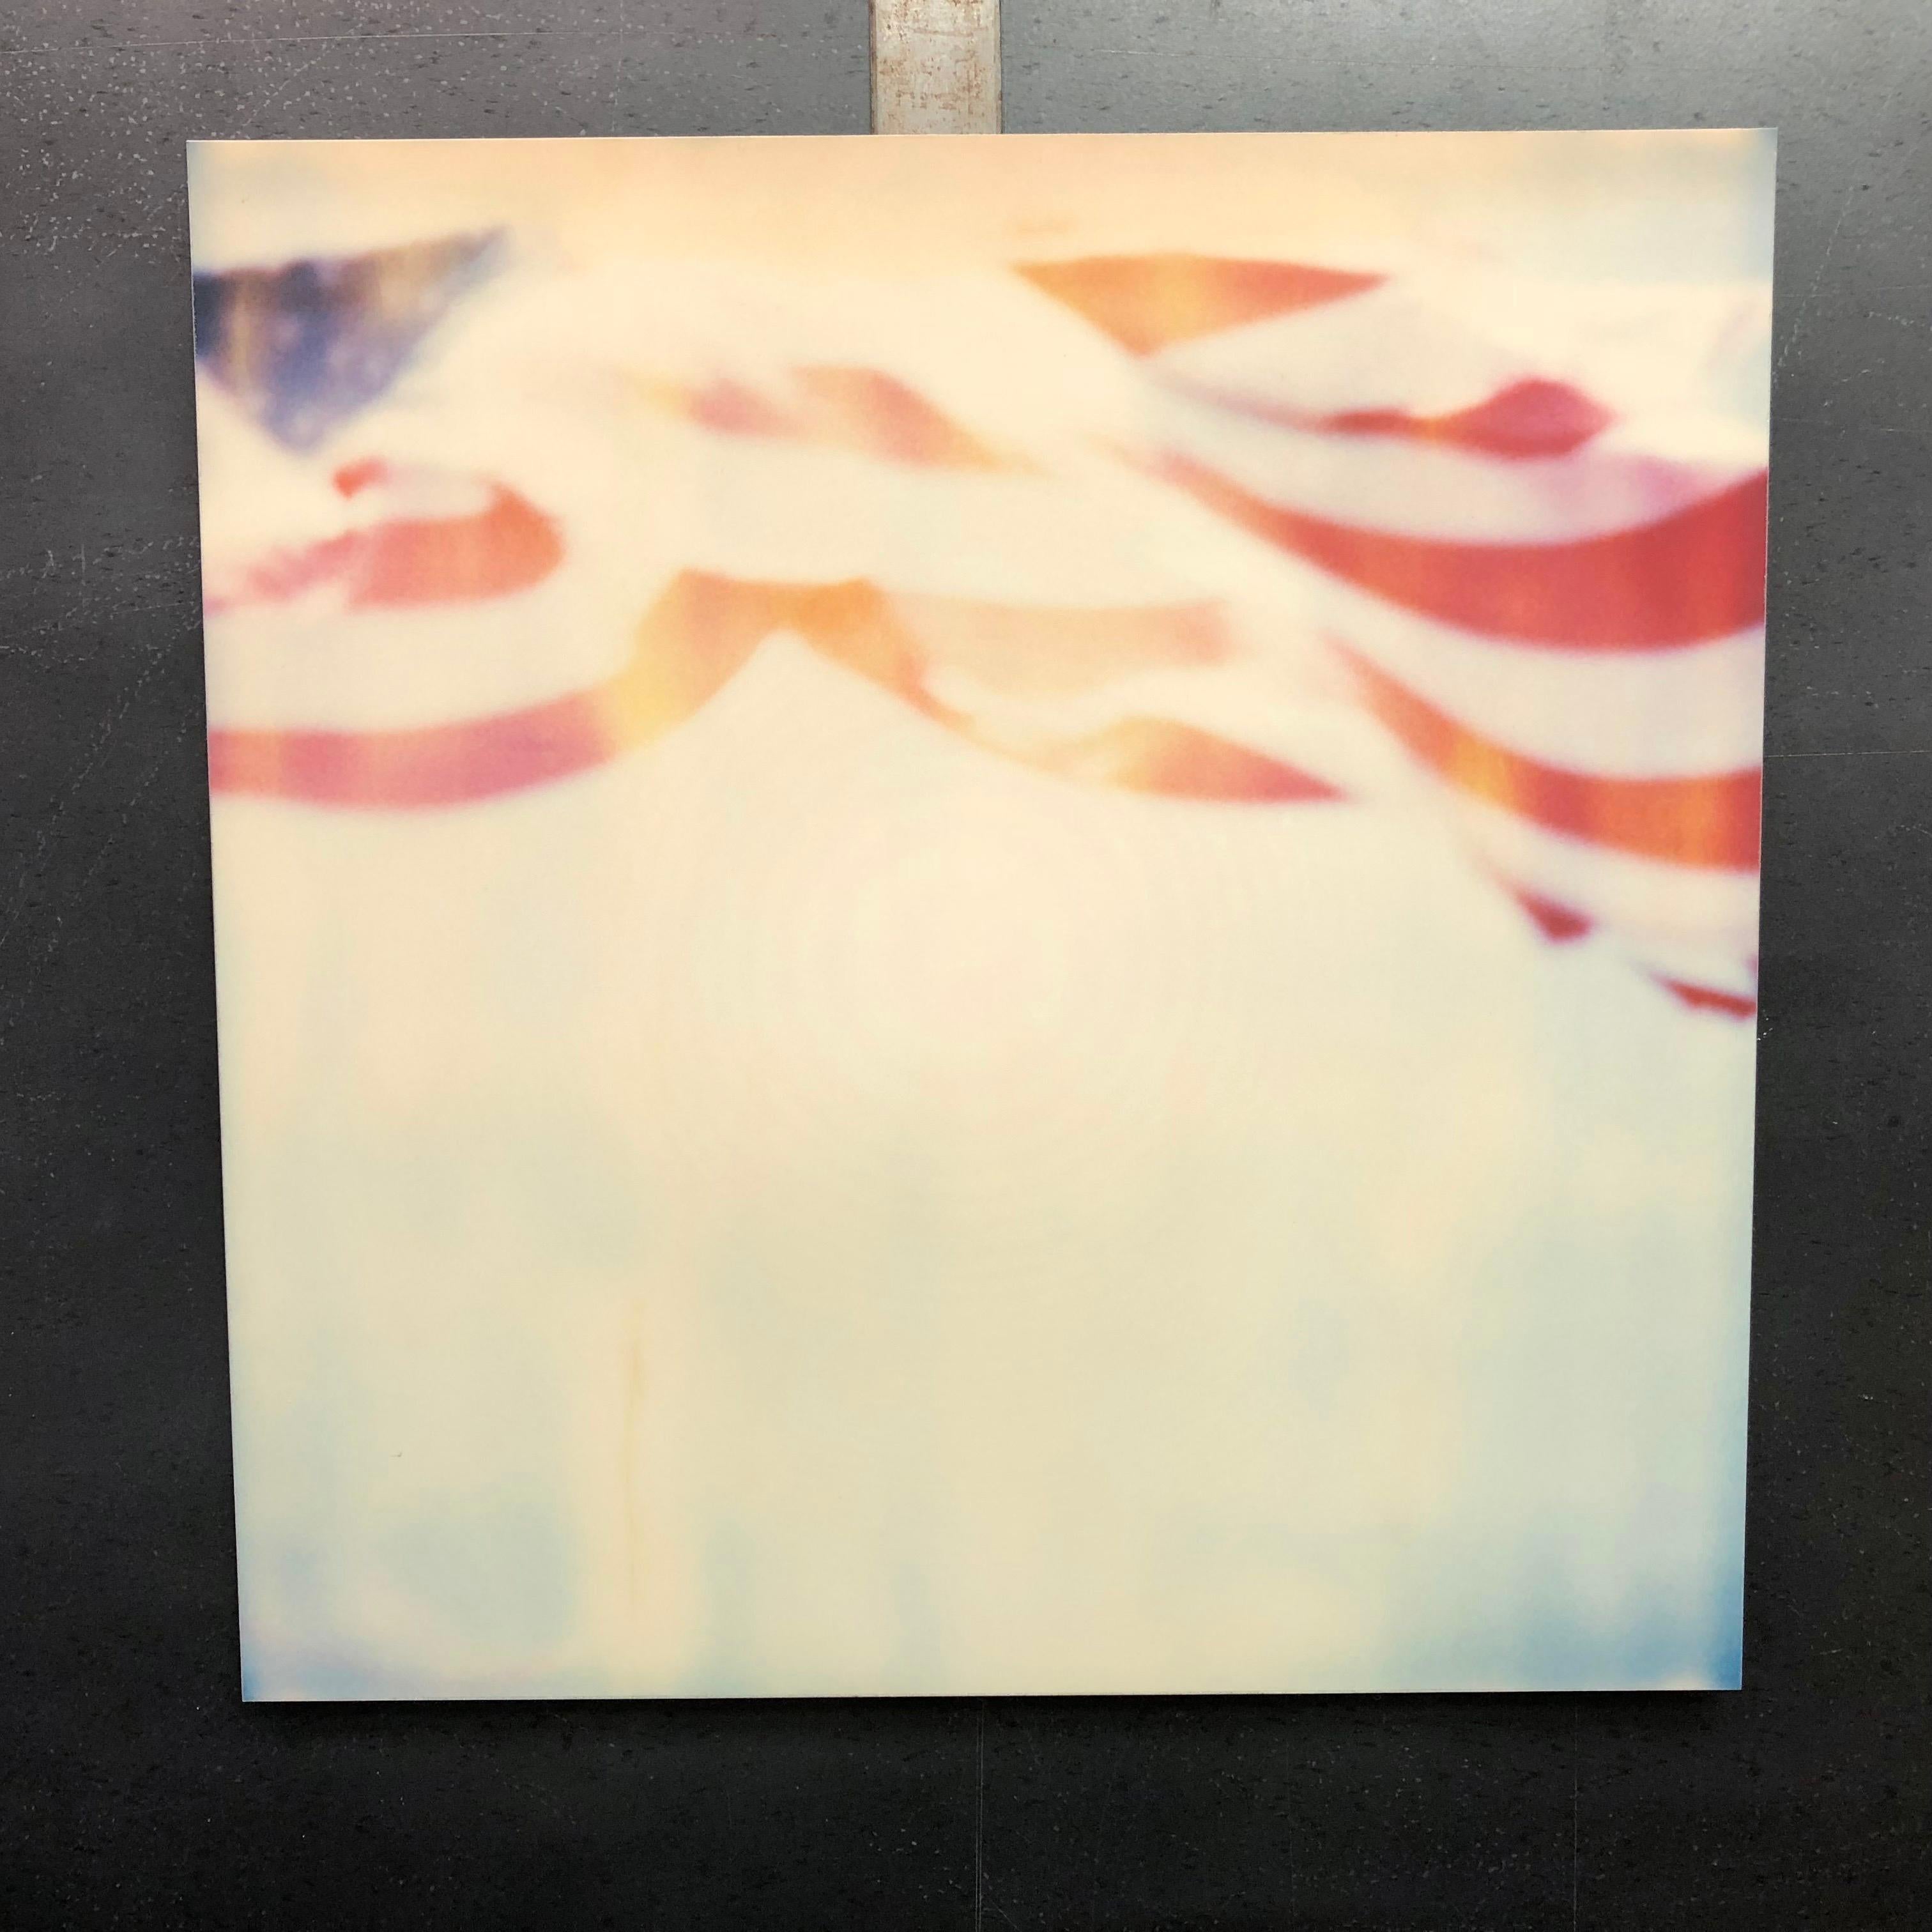 Primary Colors - Contemporary, Abstract, Landscape, USA, Polaroid, Flag For Sale 3